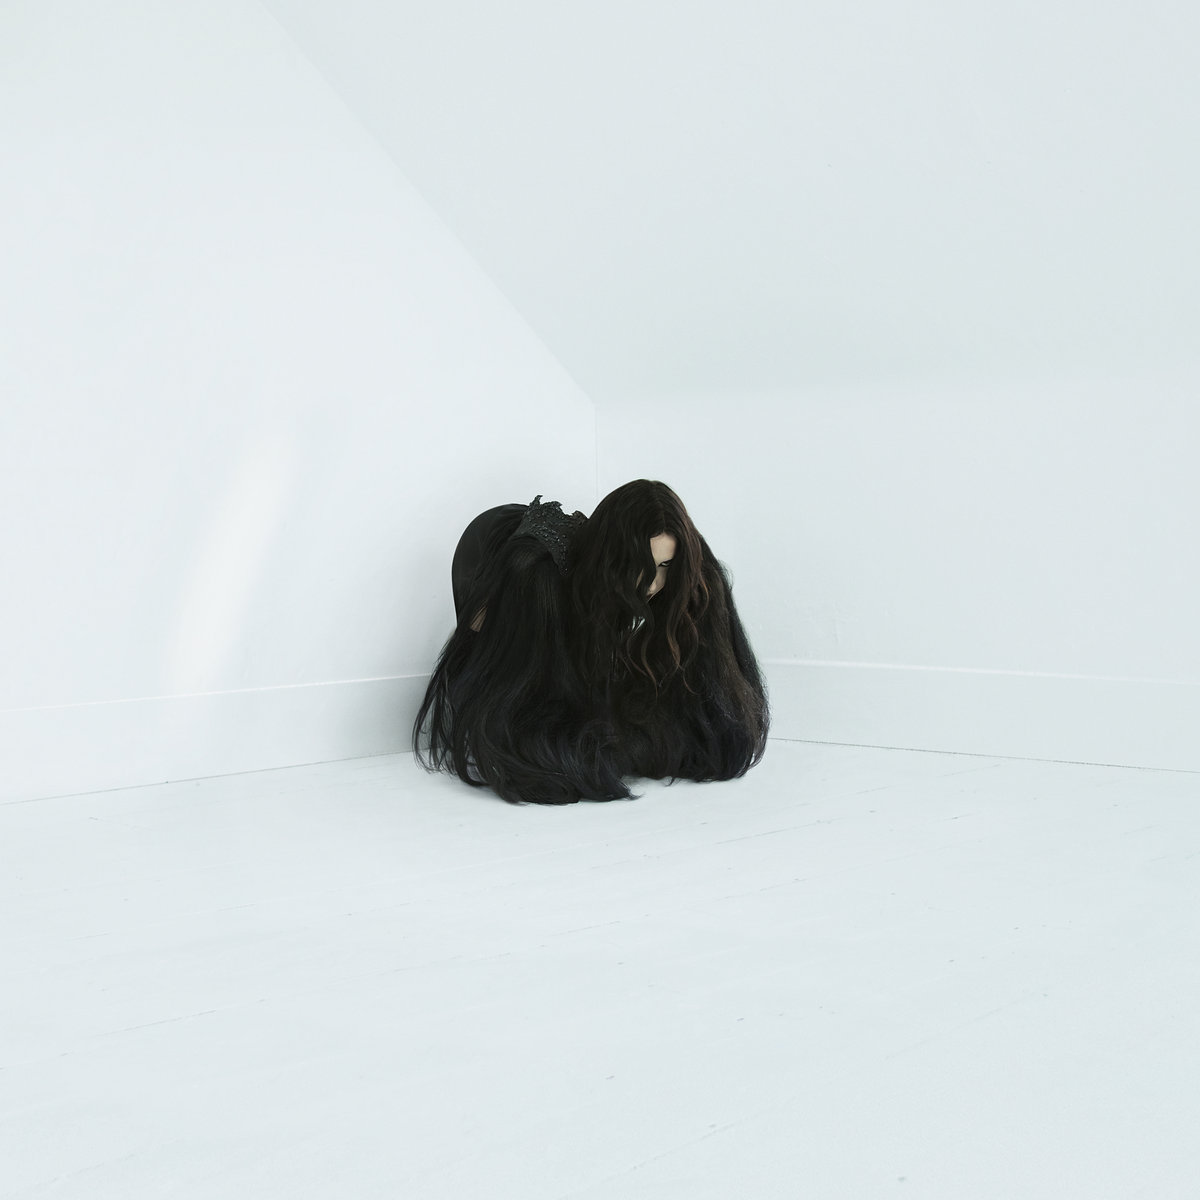 Music and video in perfect harmony: the new video by Chelsea Wolfe